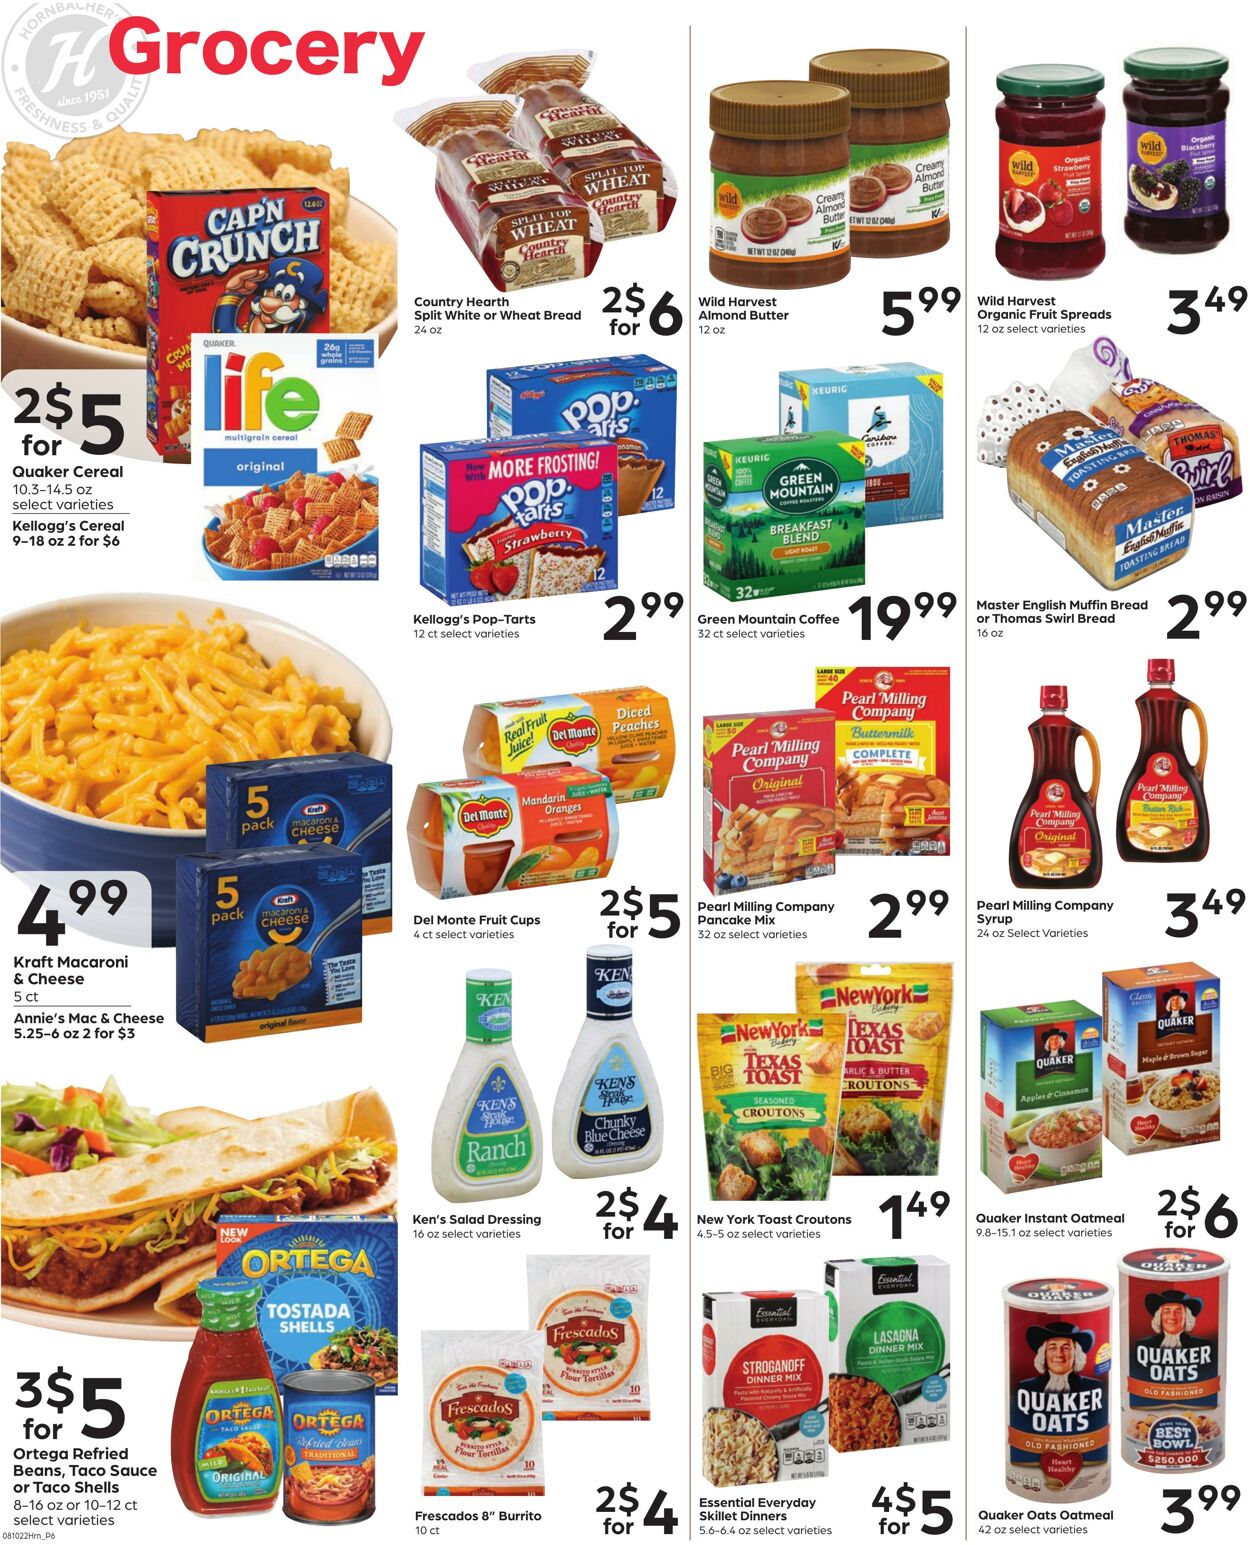 Weekly ad Hornbacher's 08/10/2022 - 08/16/2022